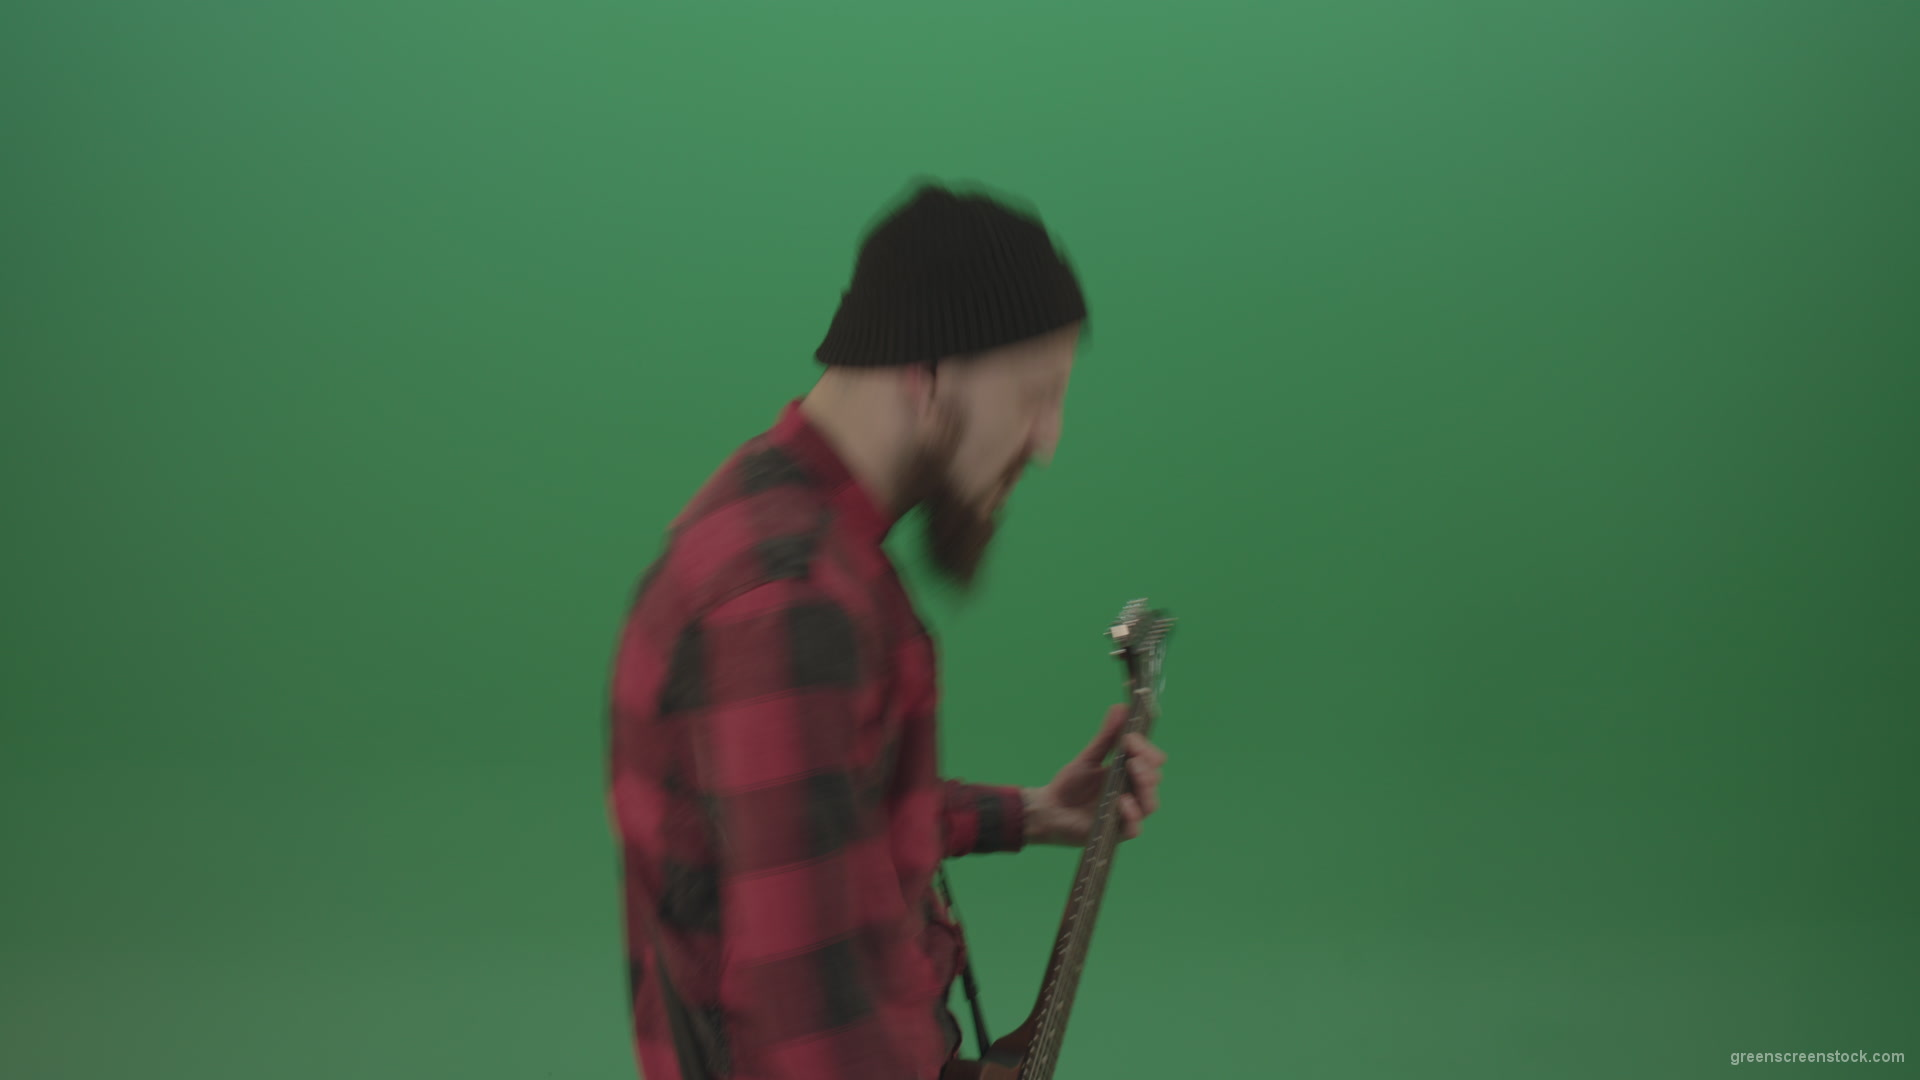 Angry-punk-rock-man-guitarist-play-guitar-and-scream-death-hardcore-music-isolated-on-green-screen_005 Green Screen Stock